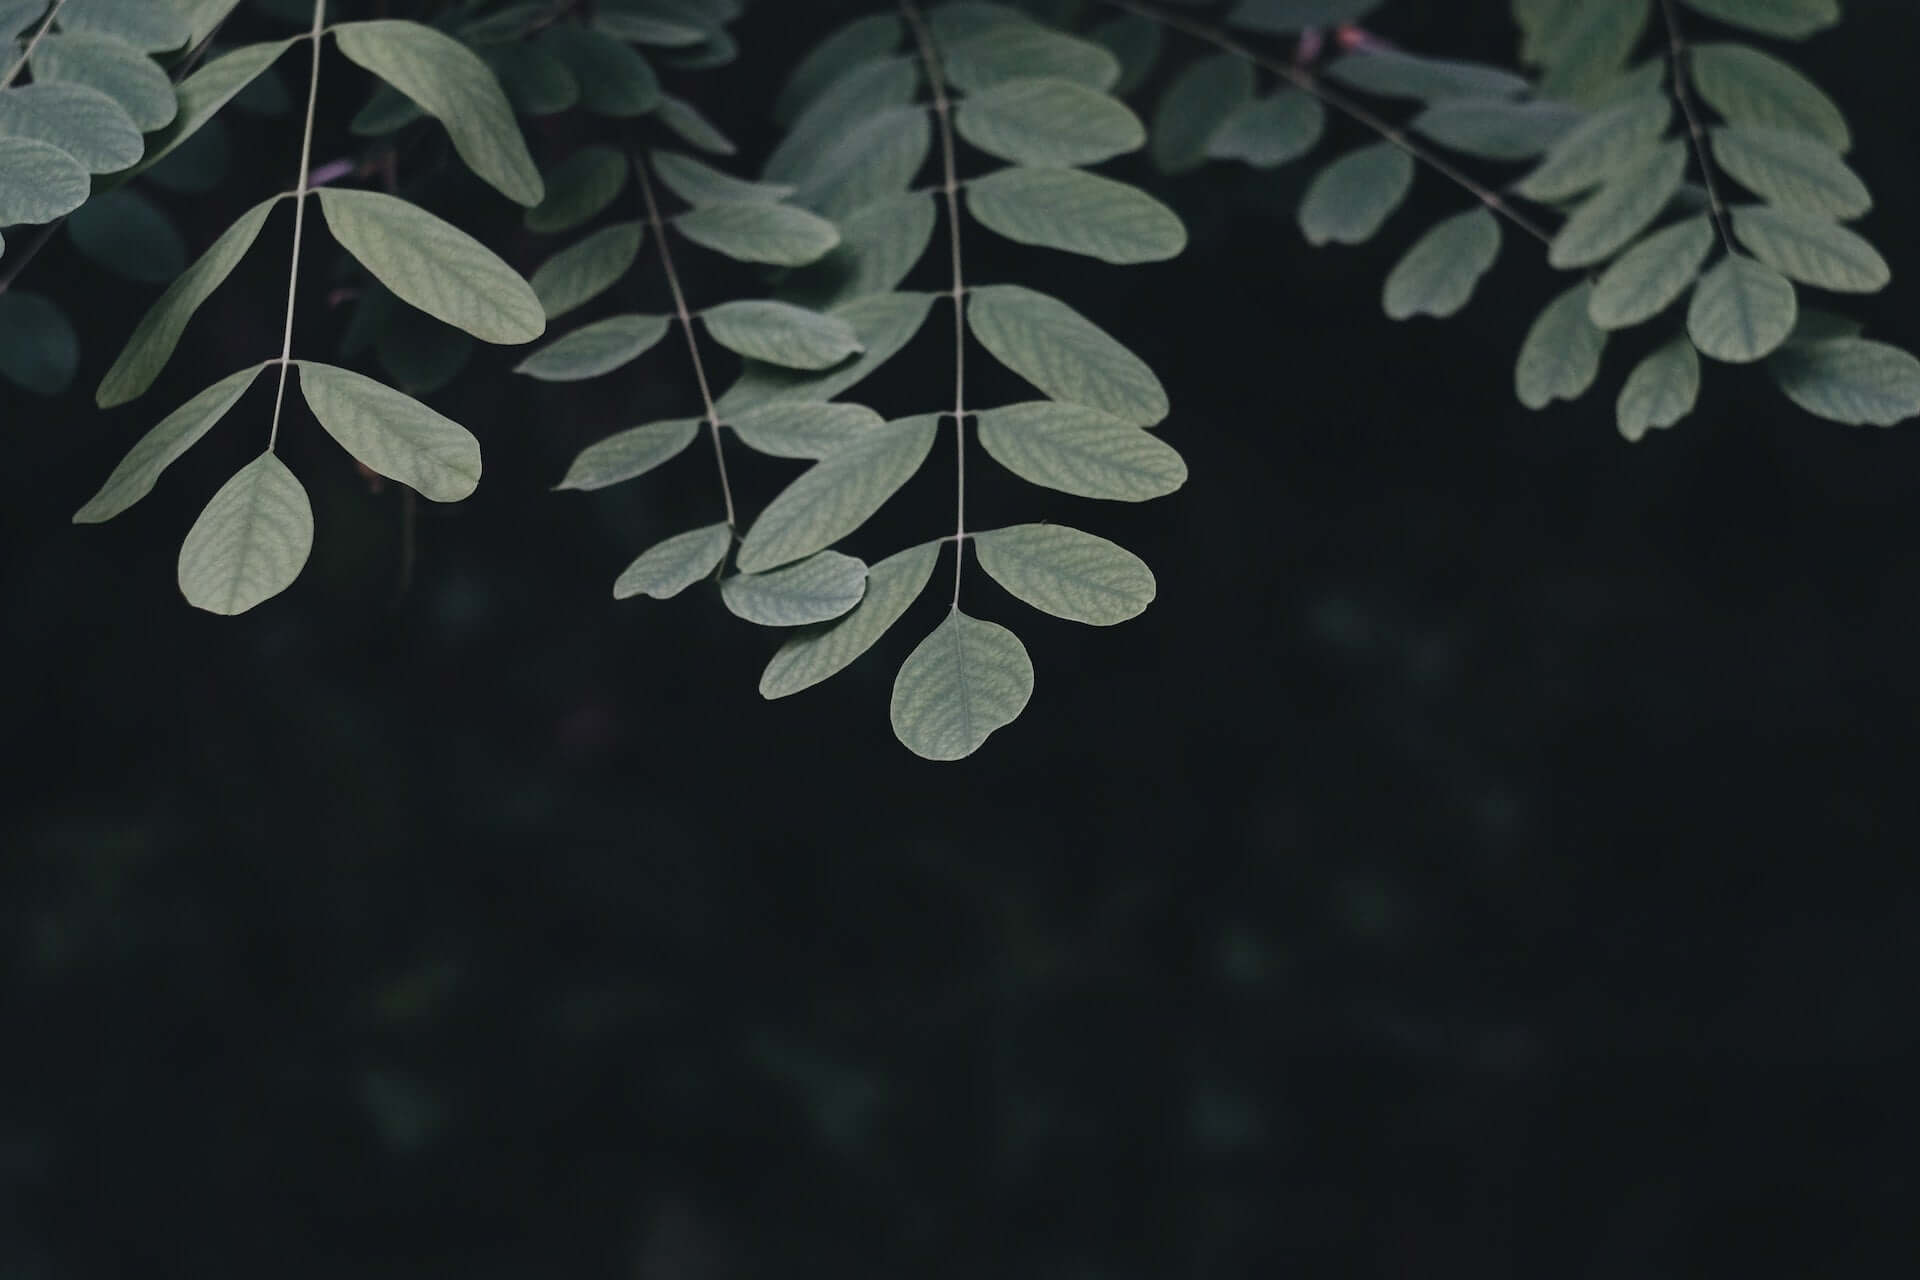 Leaves on a dark background.